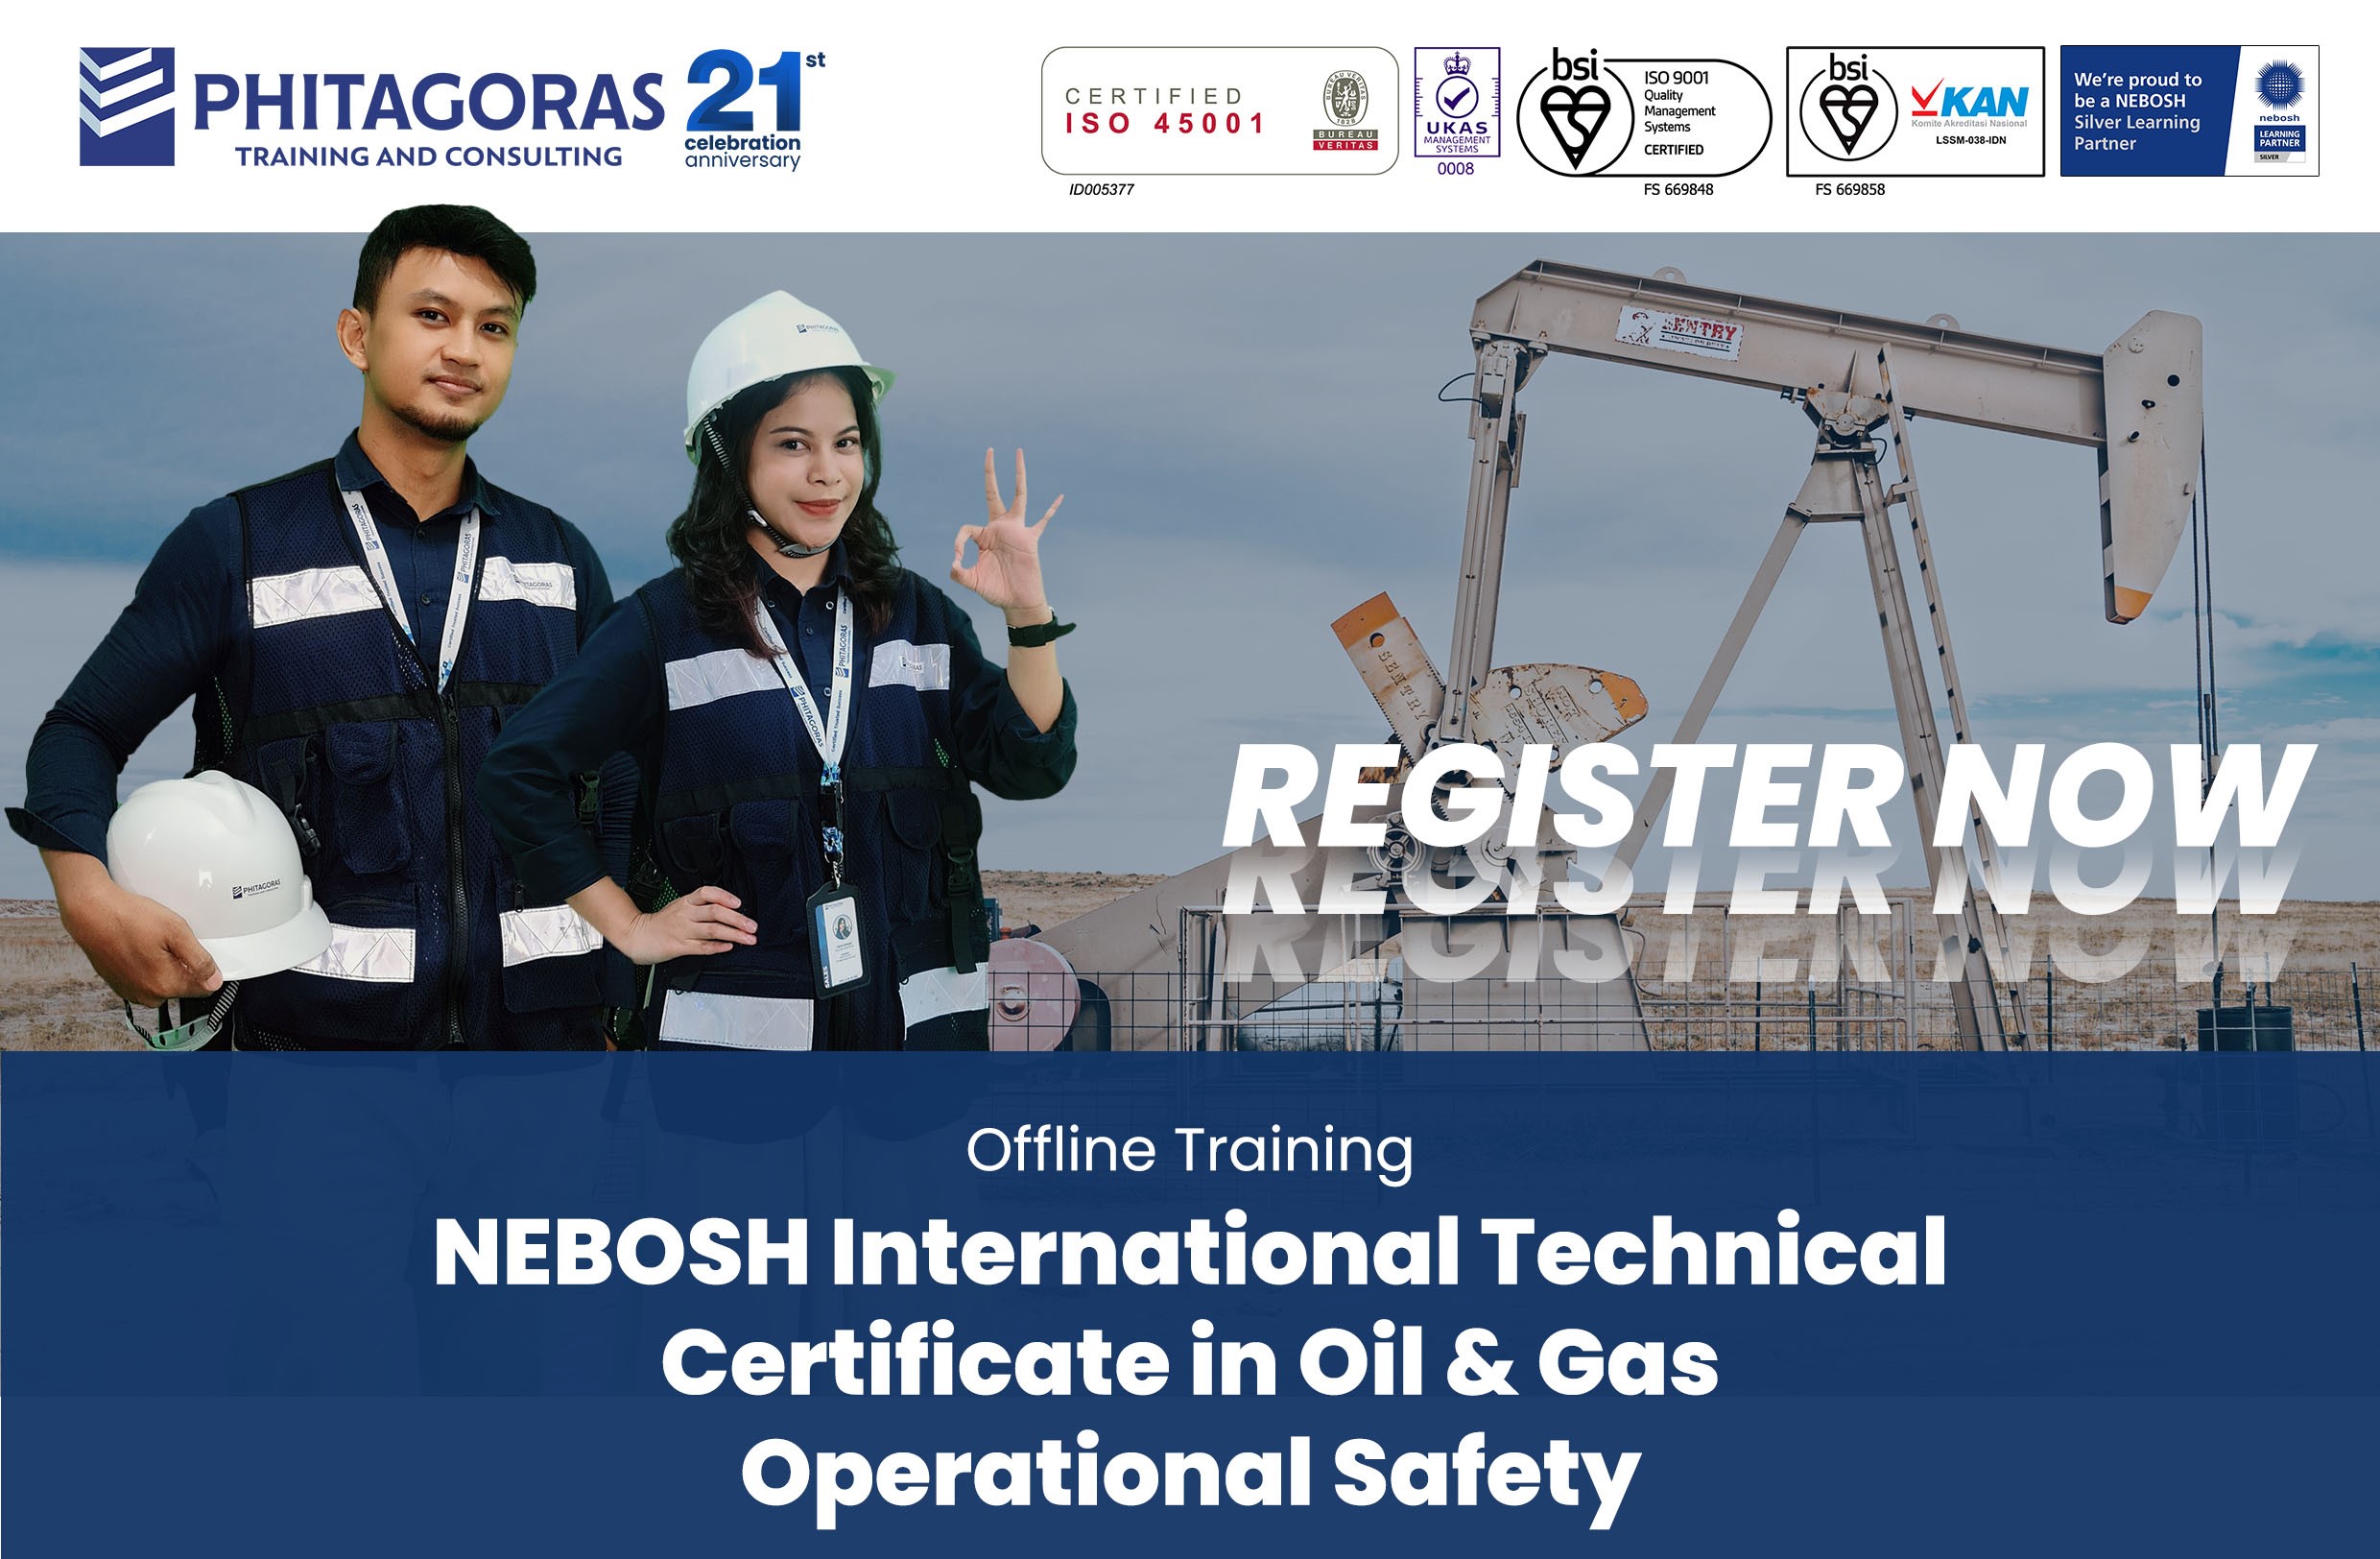 Training NEBOSH International Technical Certificate in Oil & Gas Operational Safety